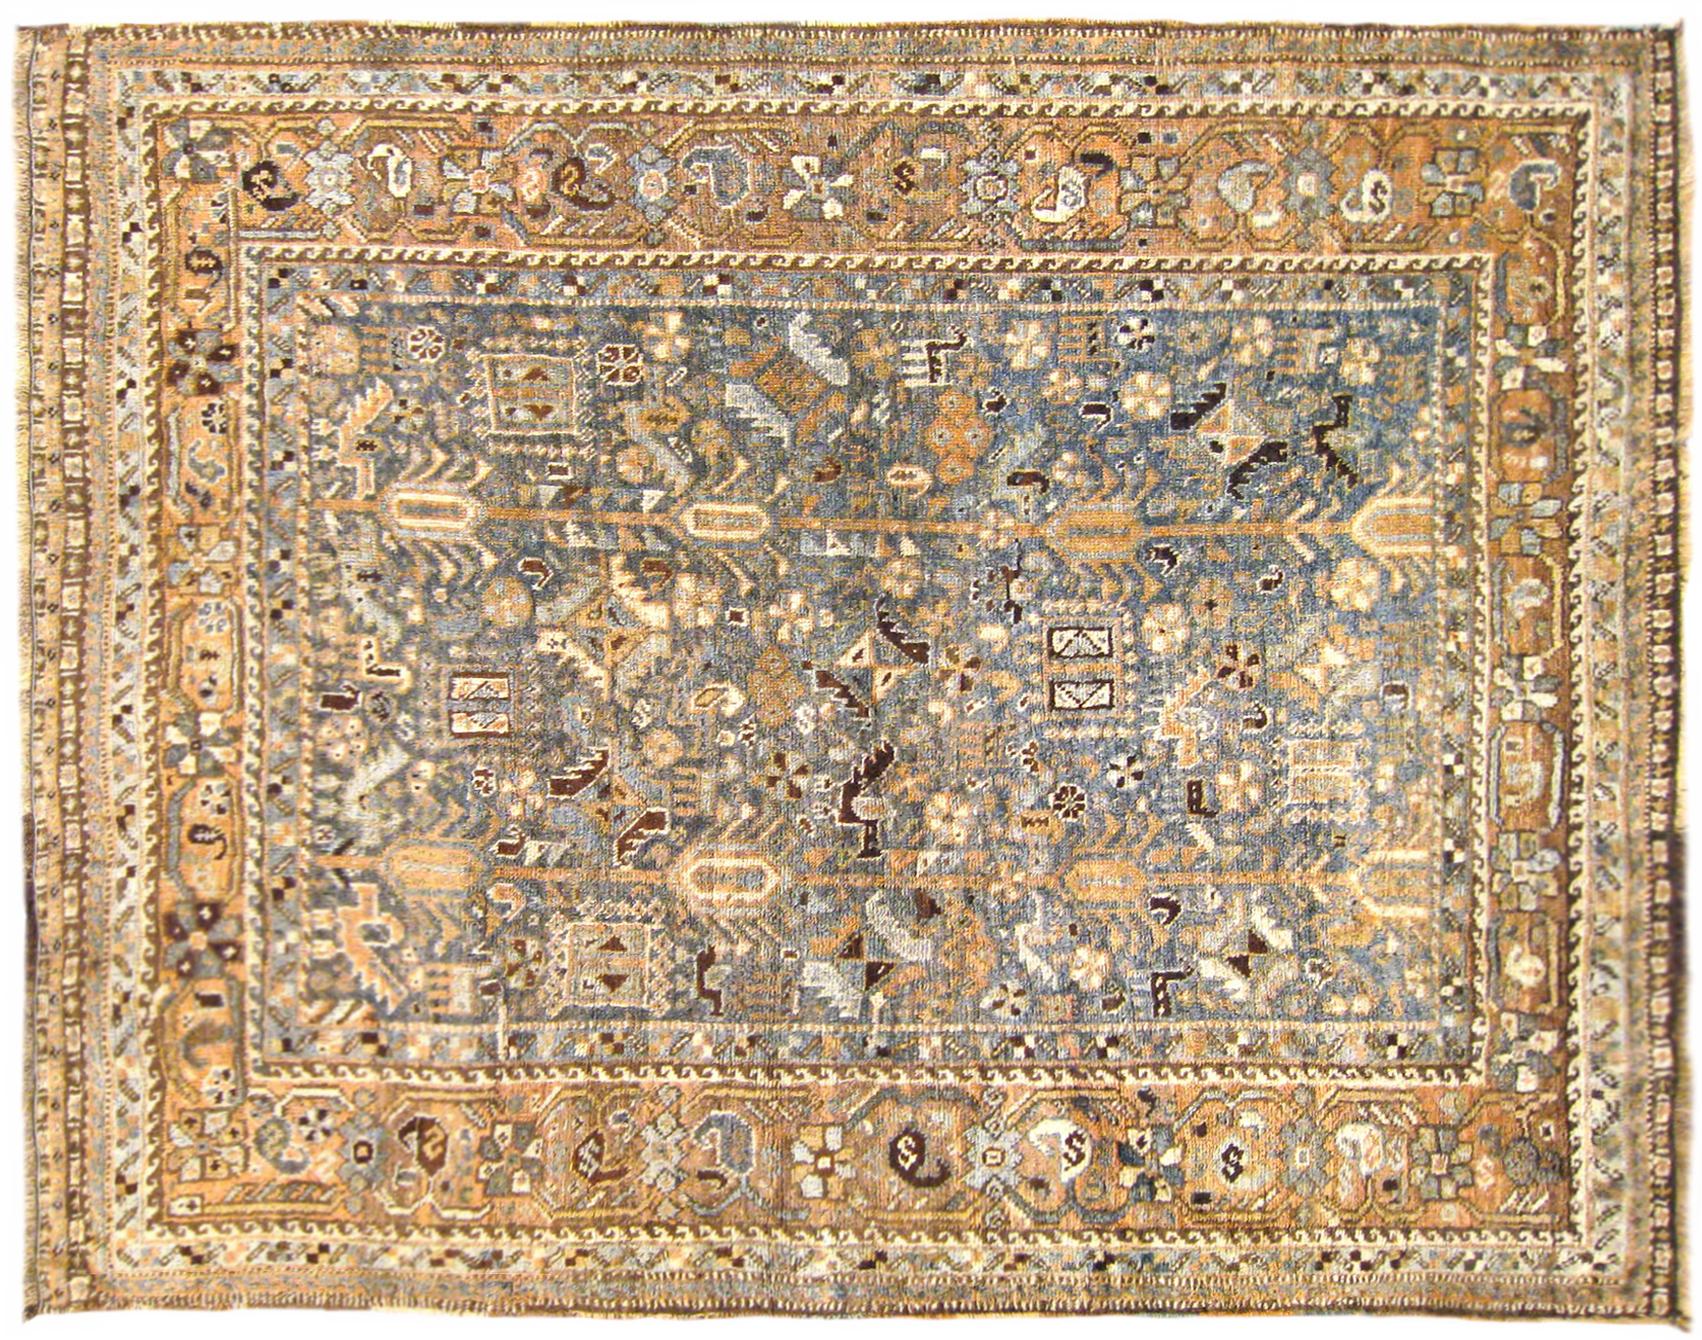 Vintage Persian Shiraz Oriental Rug, in Small Square Size, with Soft Earth Tones